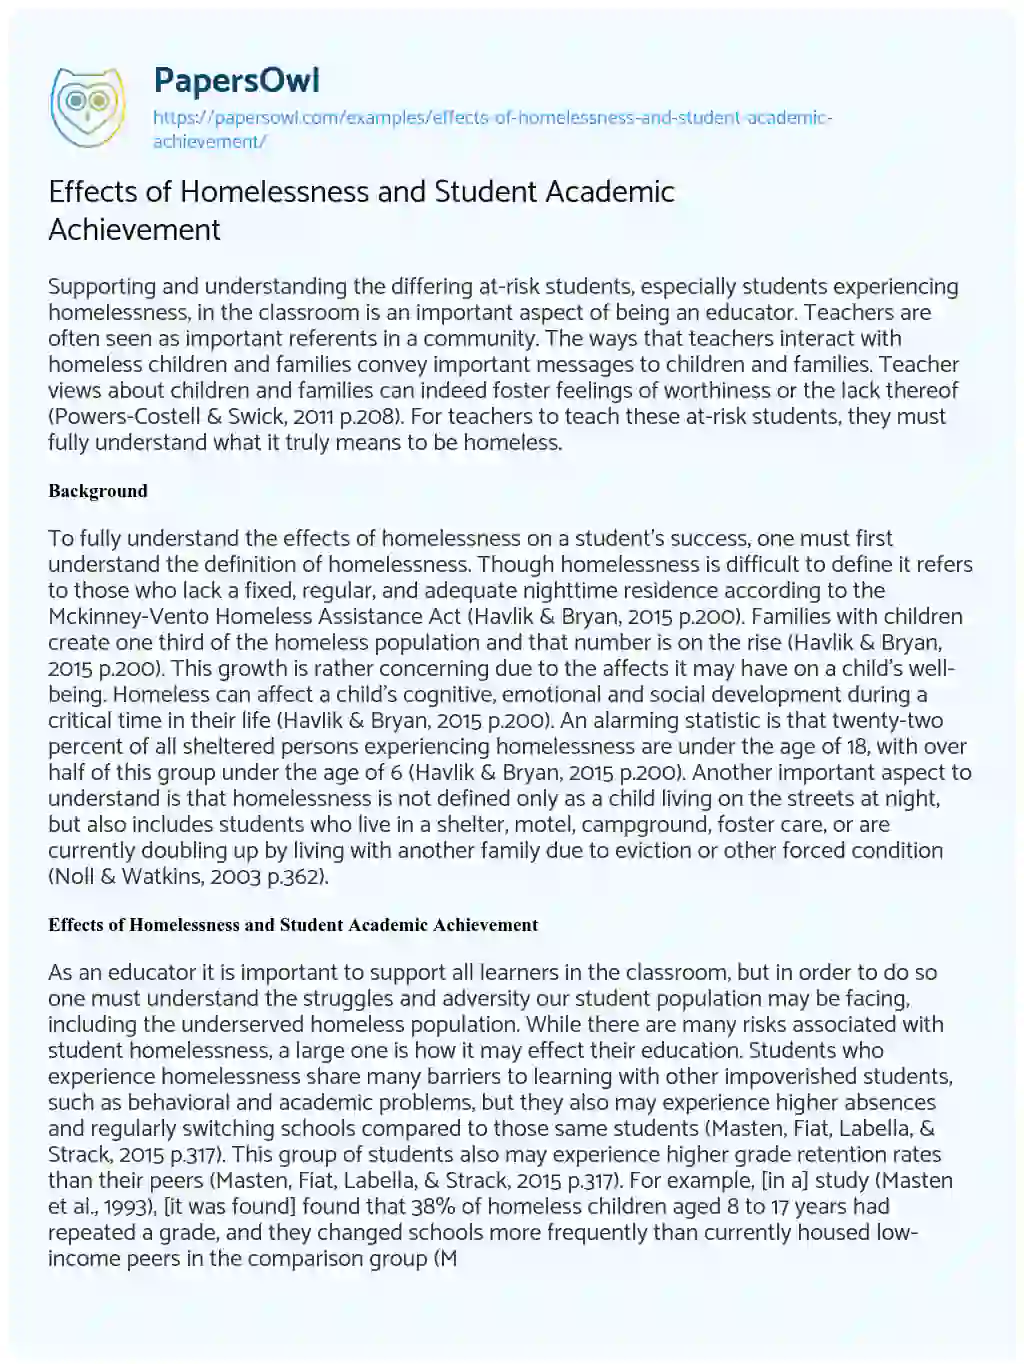 Essay on Effects of Homelessness and Student Academic Achievement